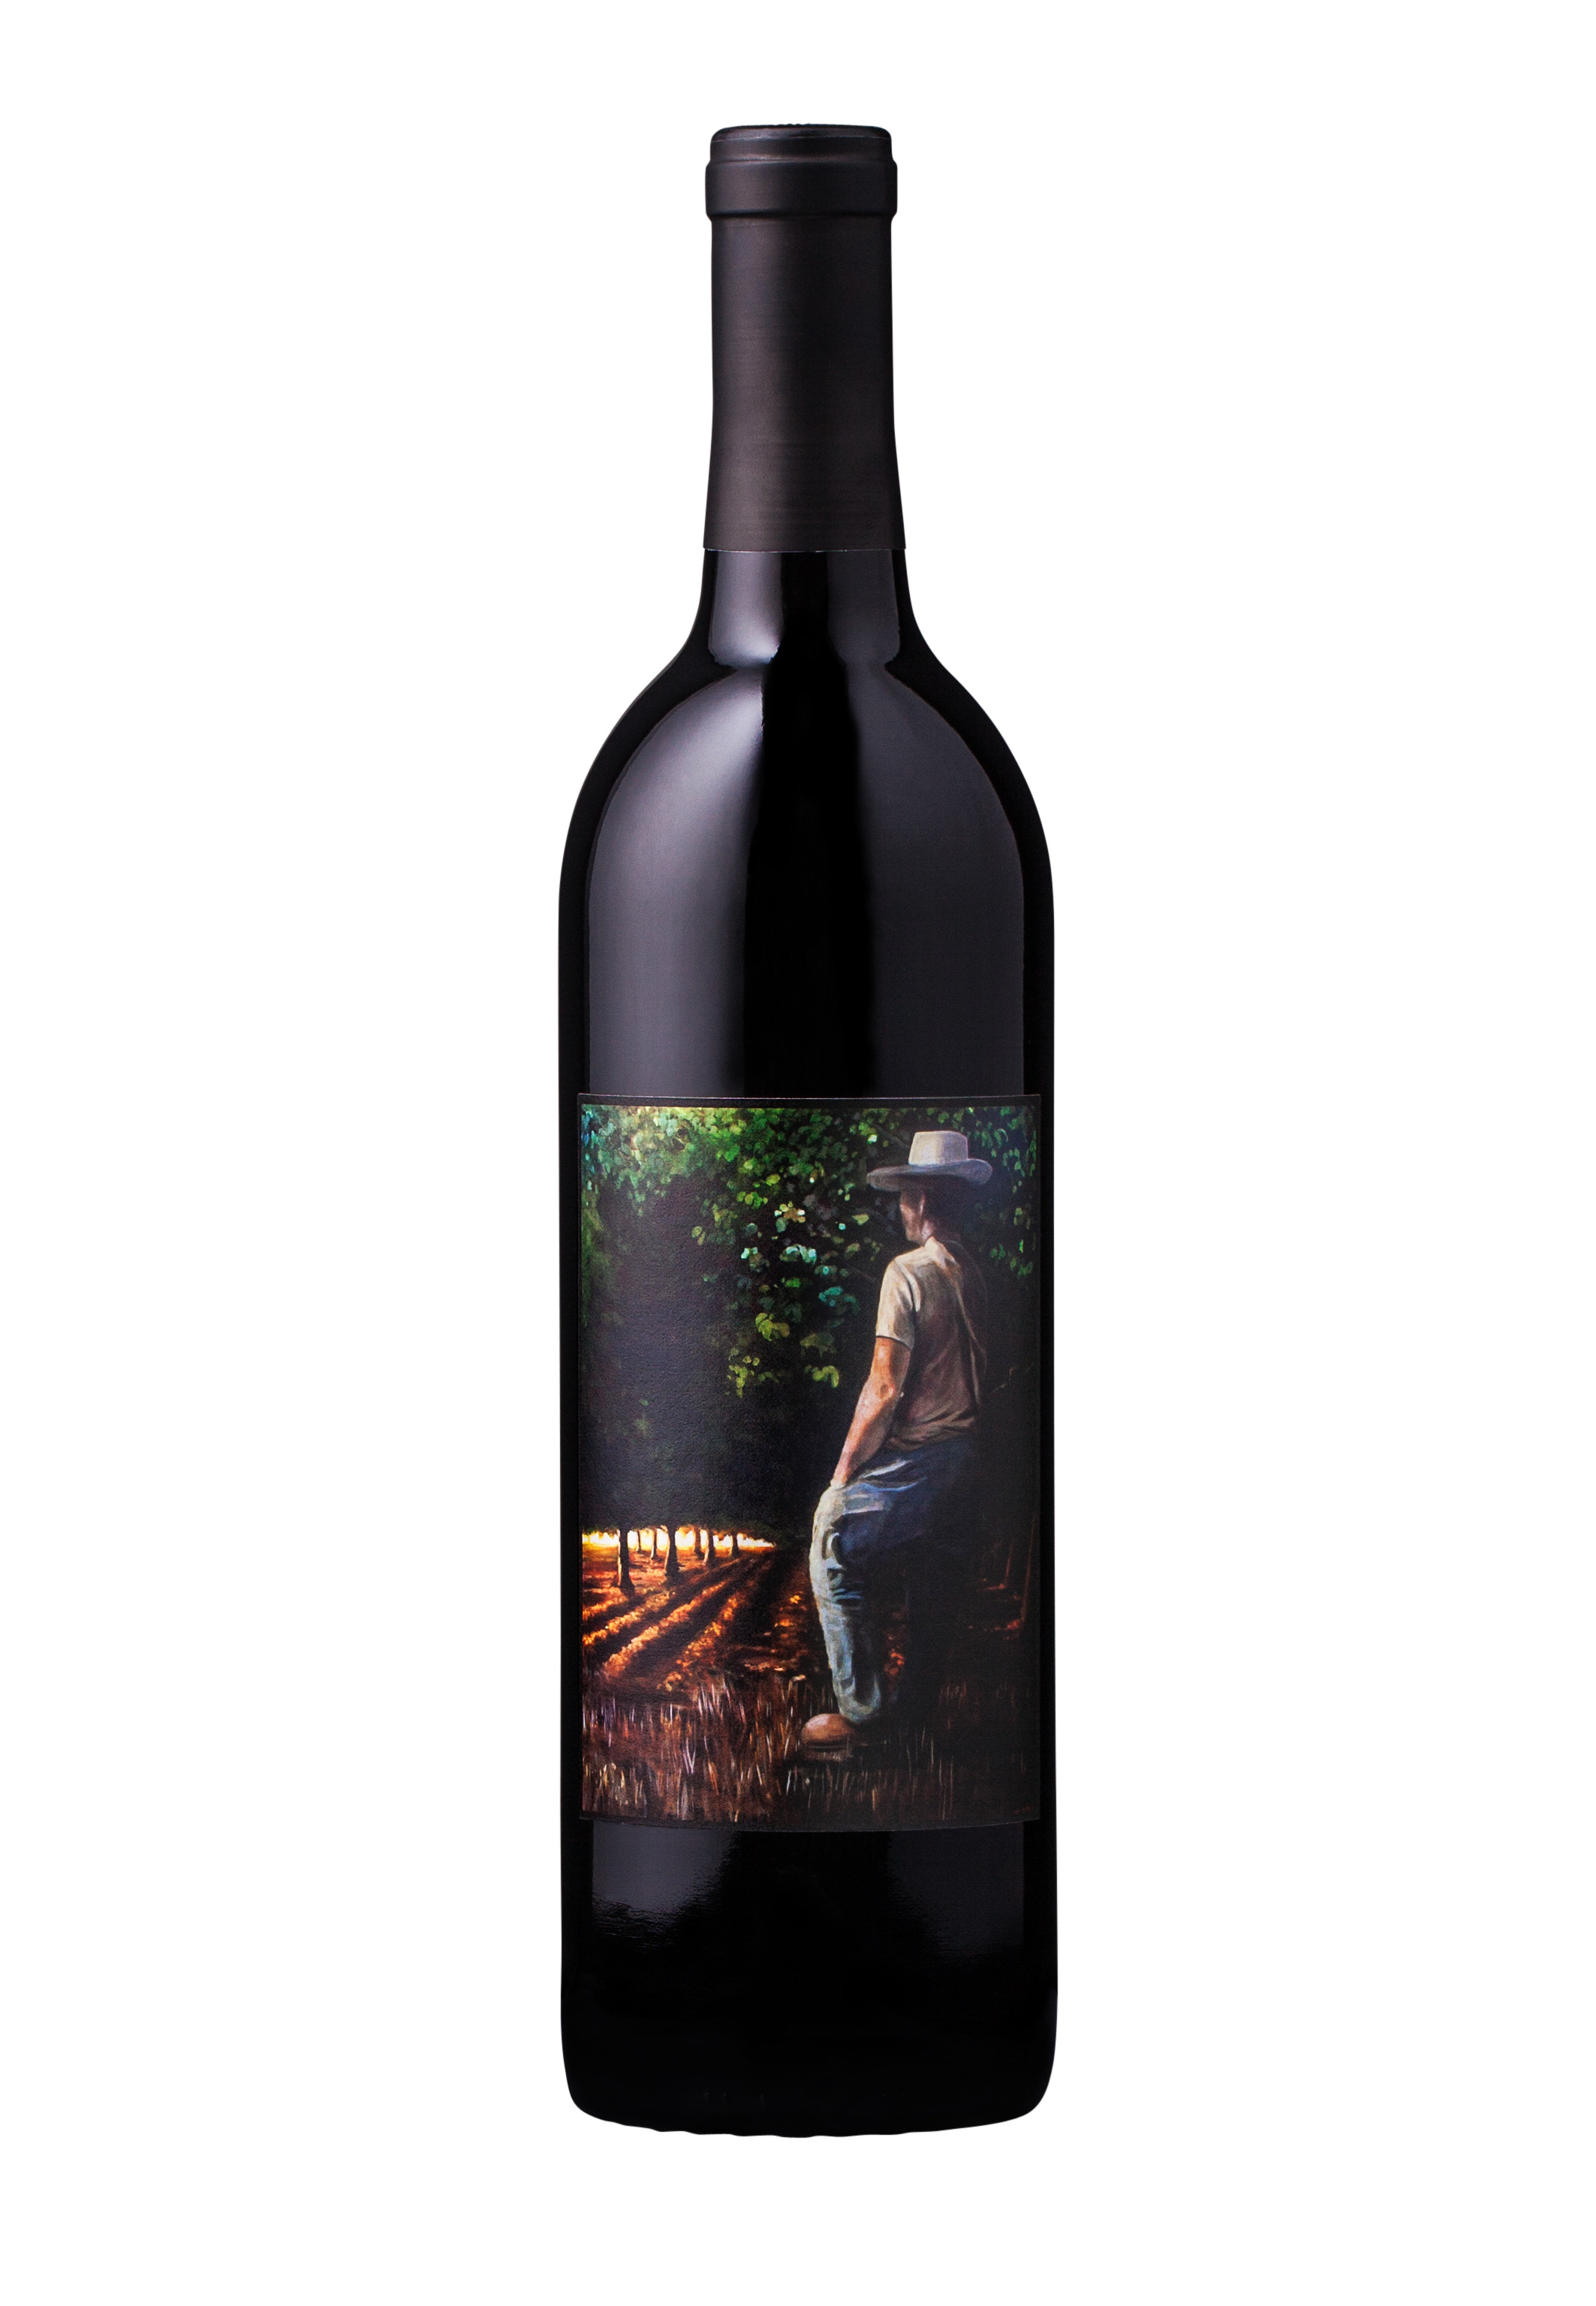 Product Image for Trahan 2018 "Grandpa's" Cabernet Sauvignon Rutherford